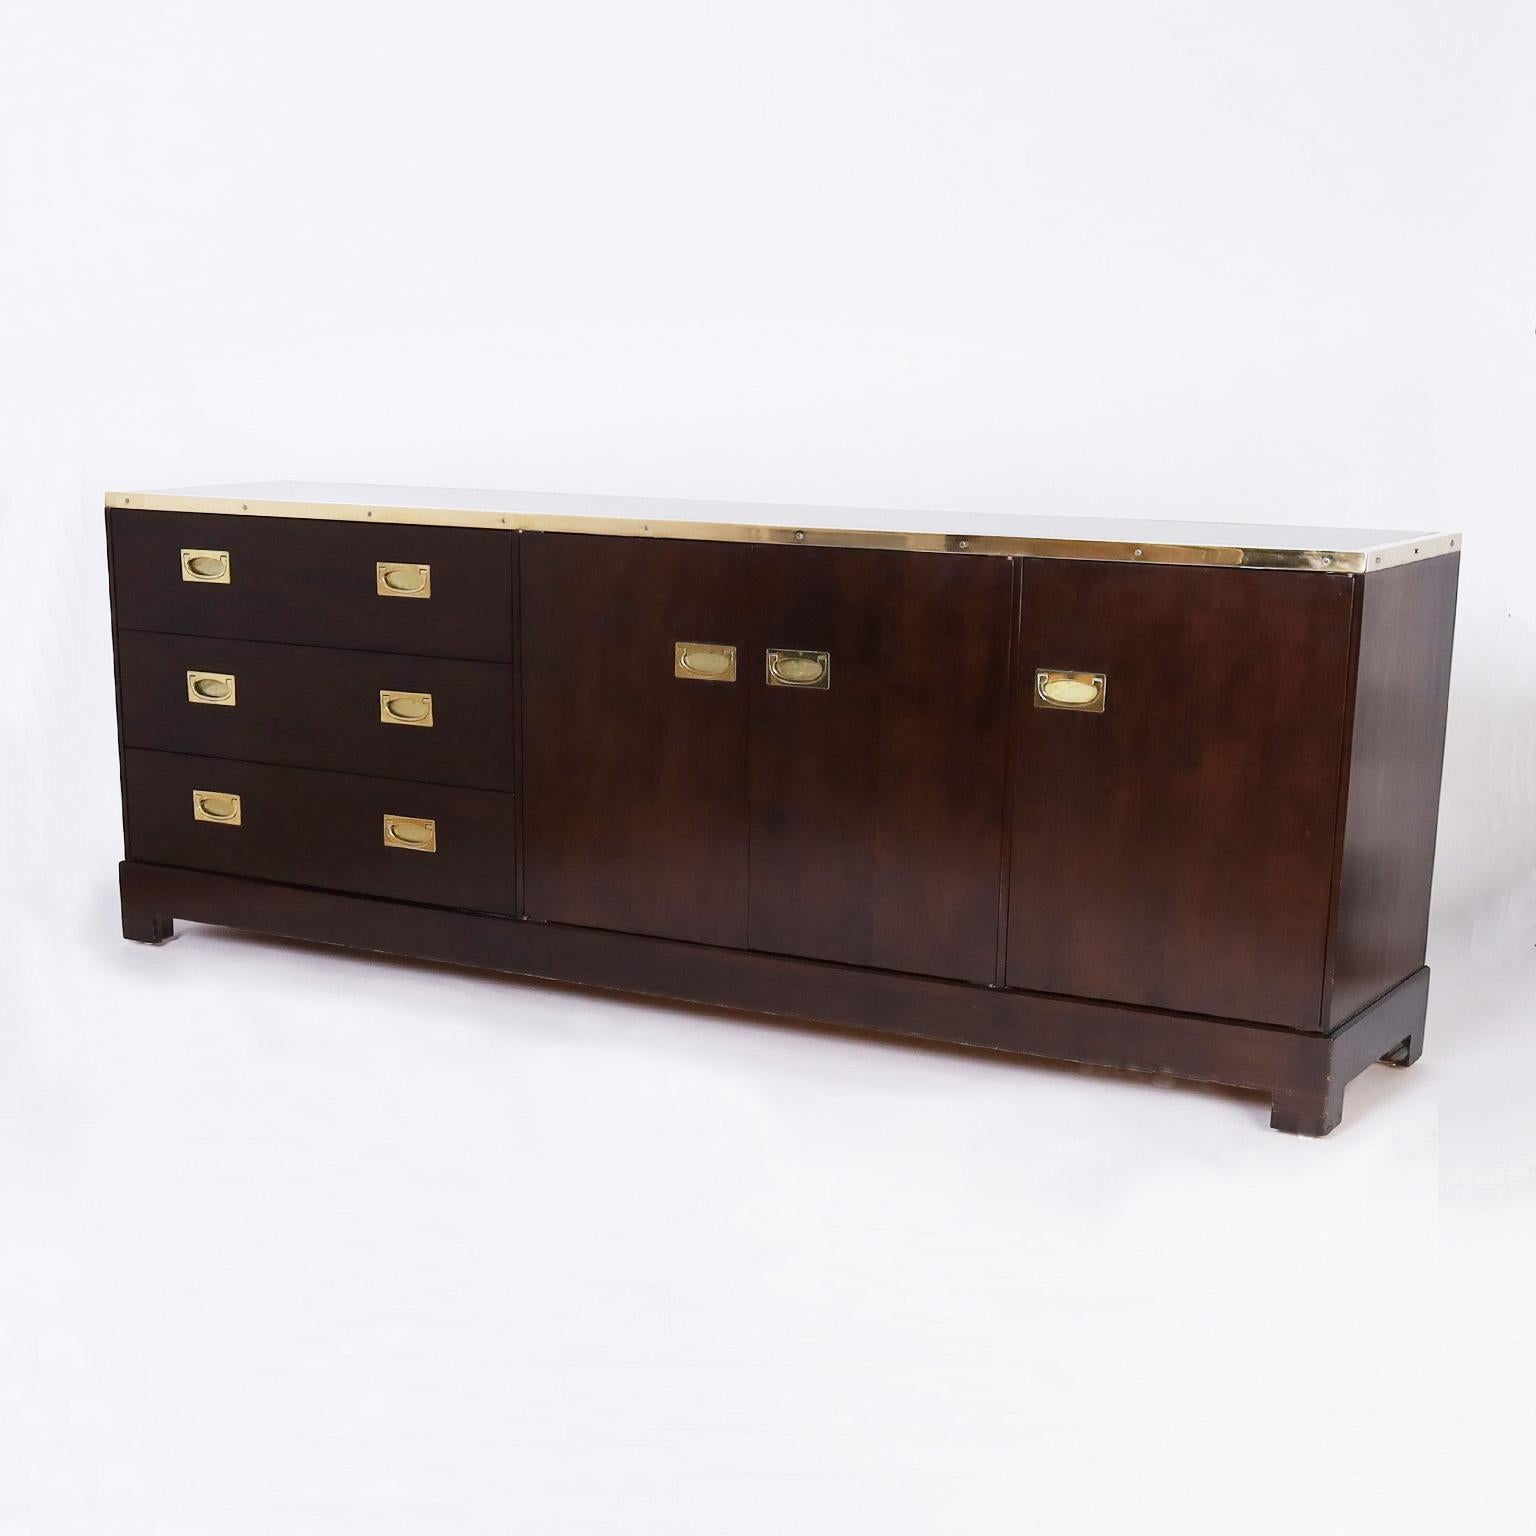 Chic mid-century chest or cabinet crafted in mahogany featuring multiple components including brass campaign style hardware including three drawers and three doors. Plenty of storage with a sleek modern form and stylized bracket feet. Signed